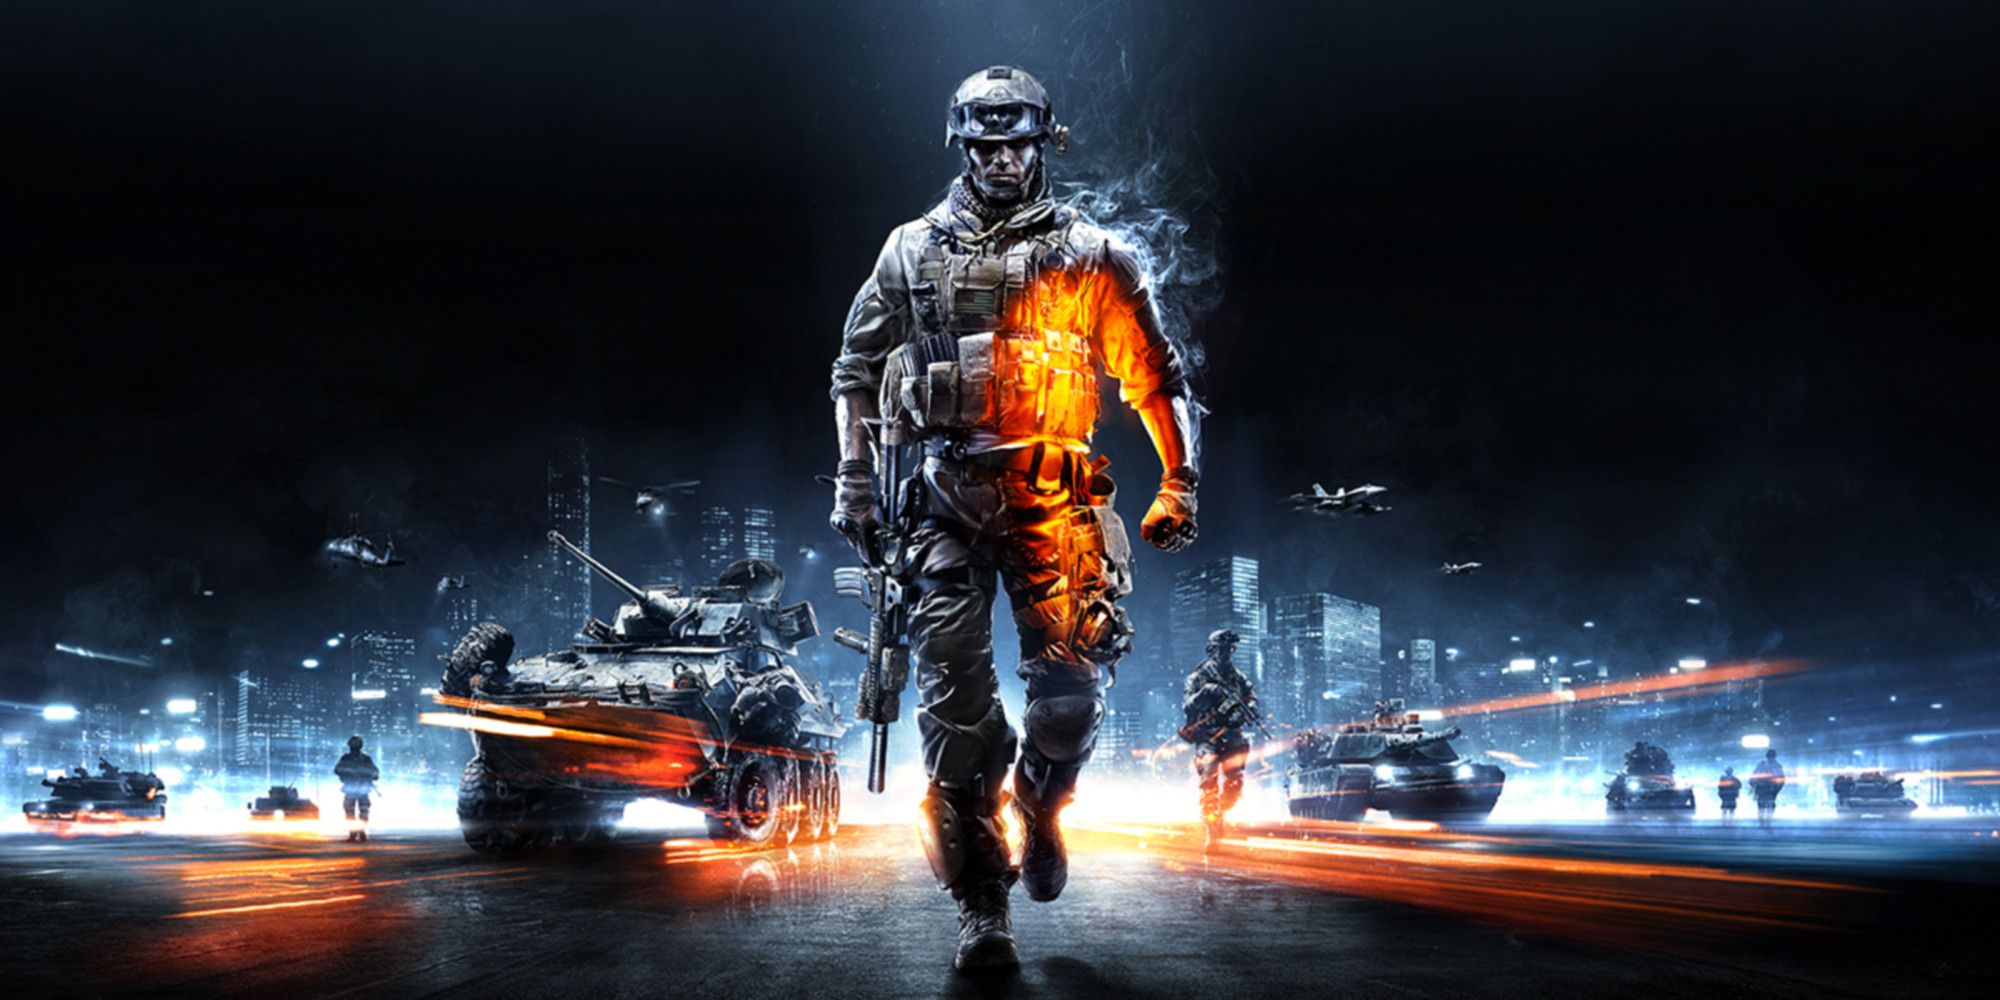 3840x2131 / 3840x2131 battlefield 3 4k pc wallpaper download hd -  Coolwallpapers.me!